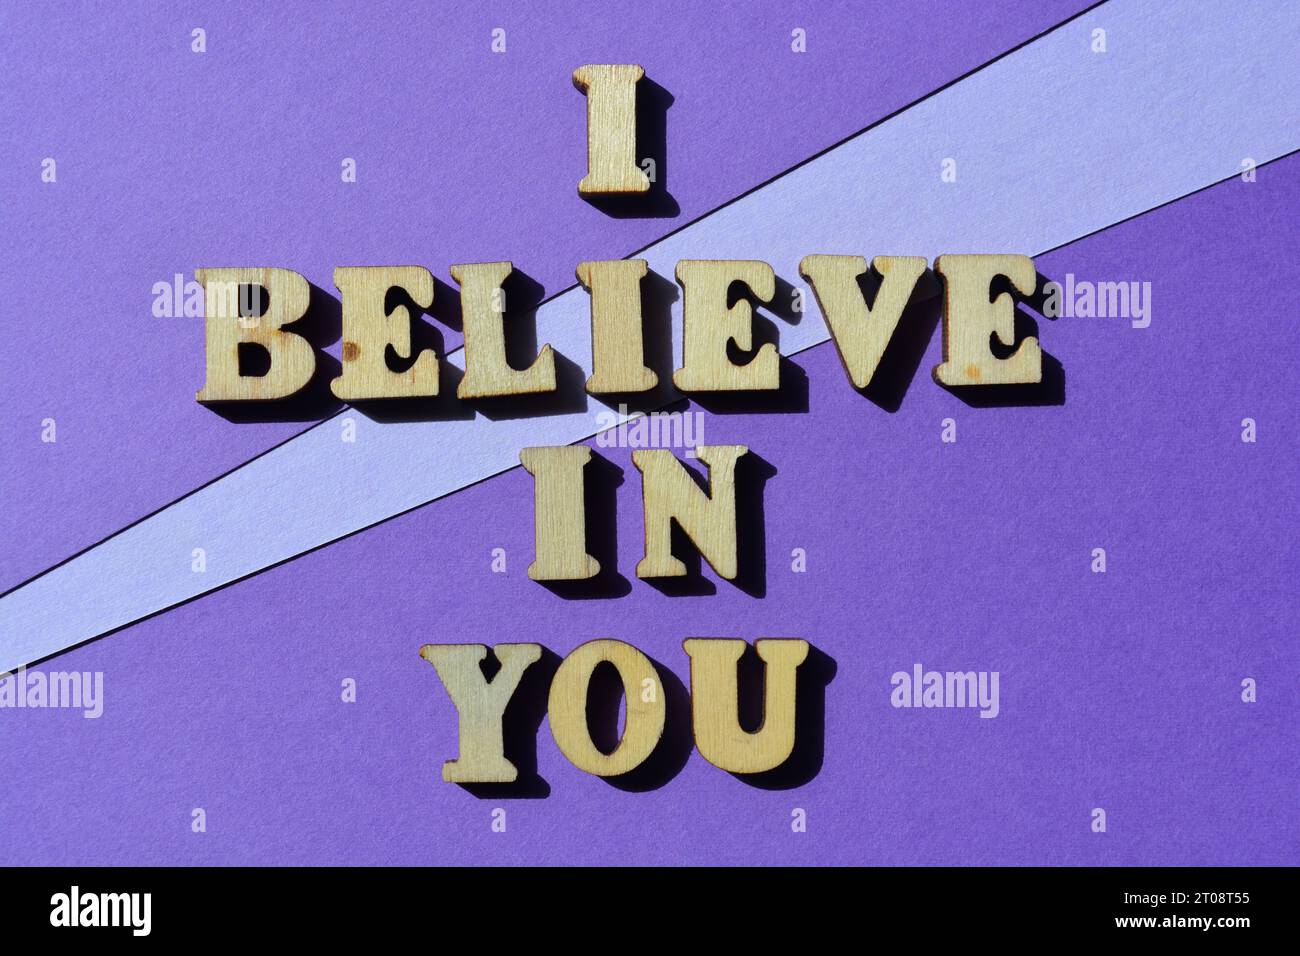 I Believe In You, words in wooden alphabet letters isolated on purple background as banner headline Stock Photo